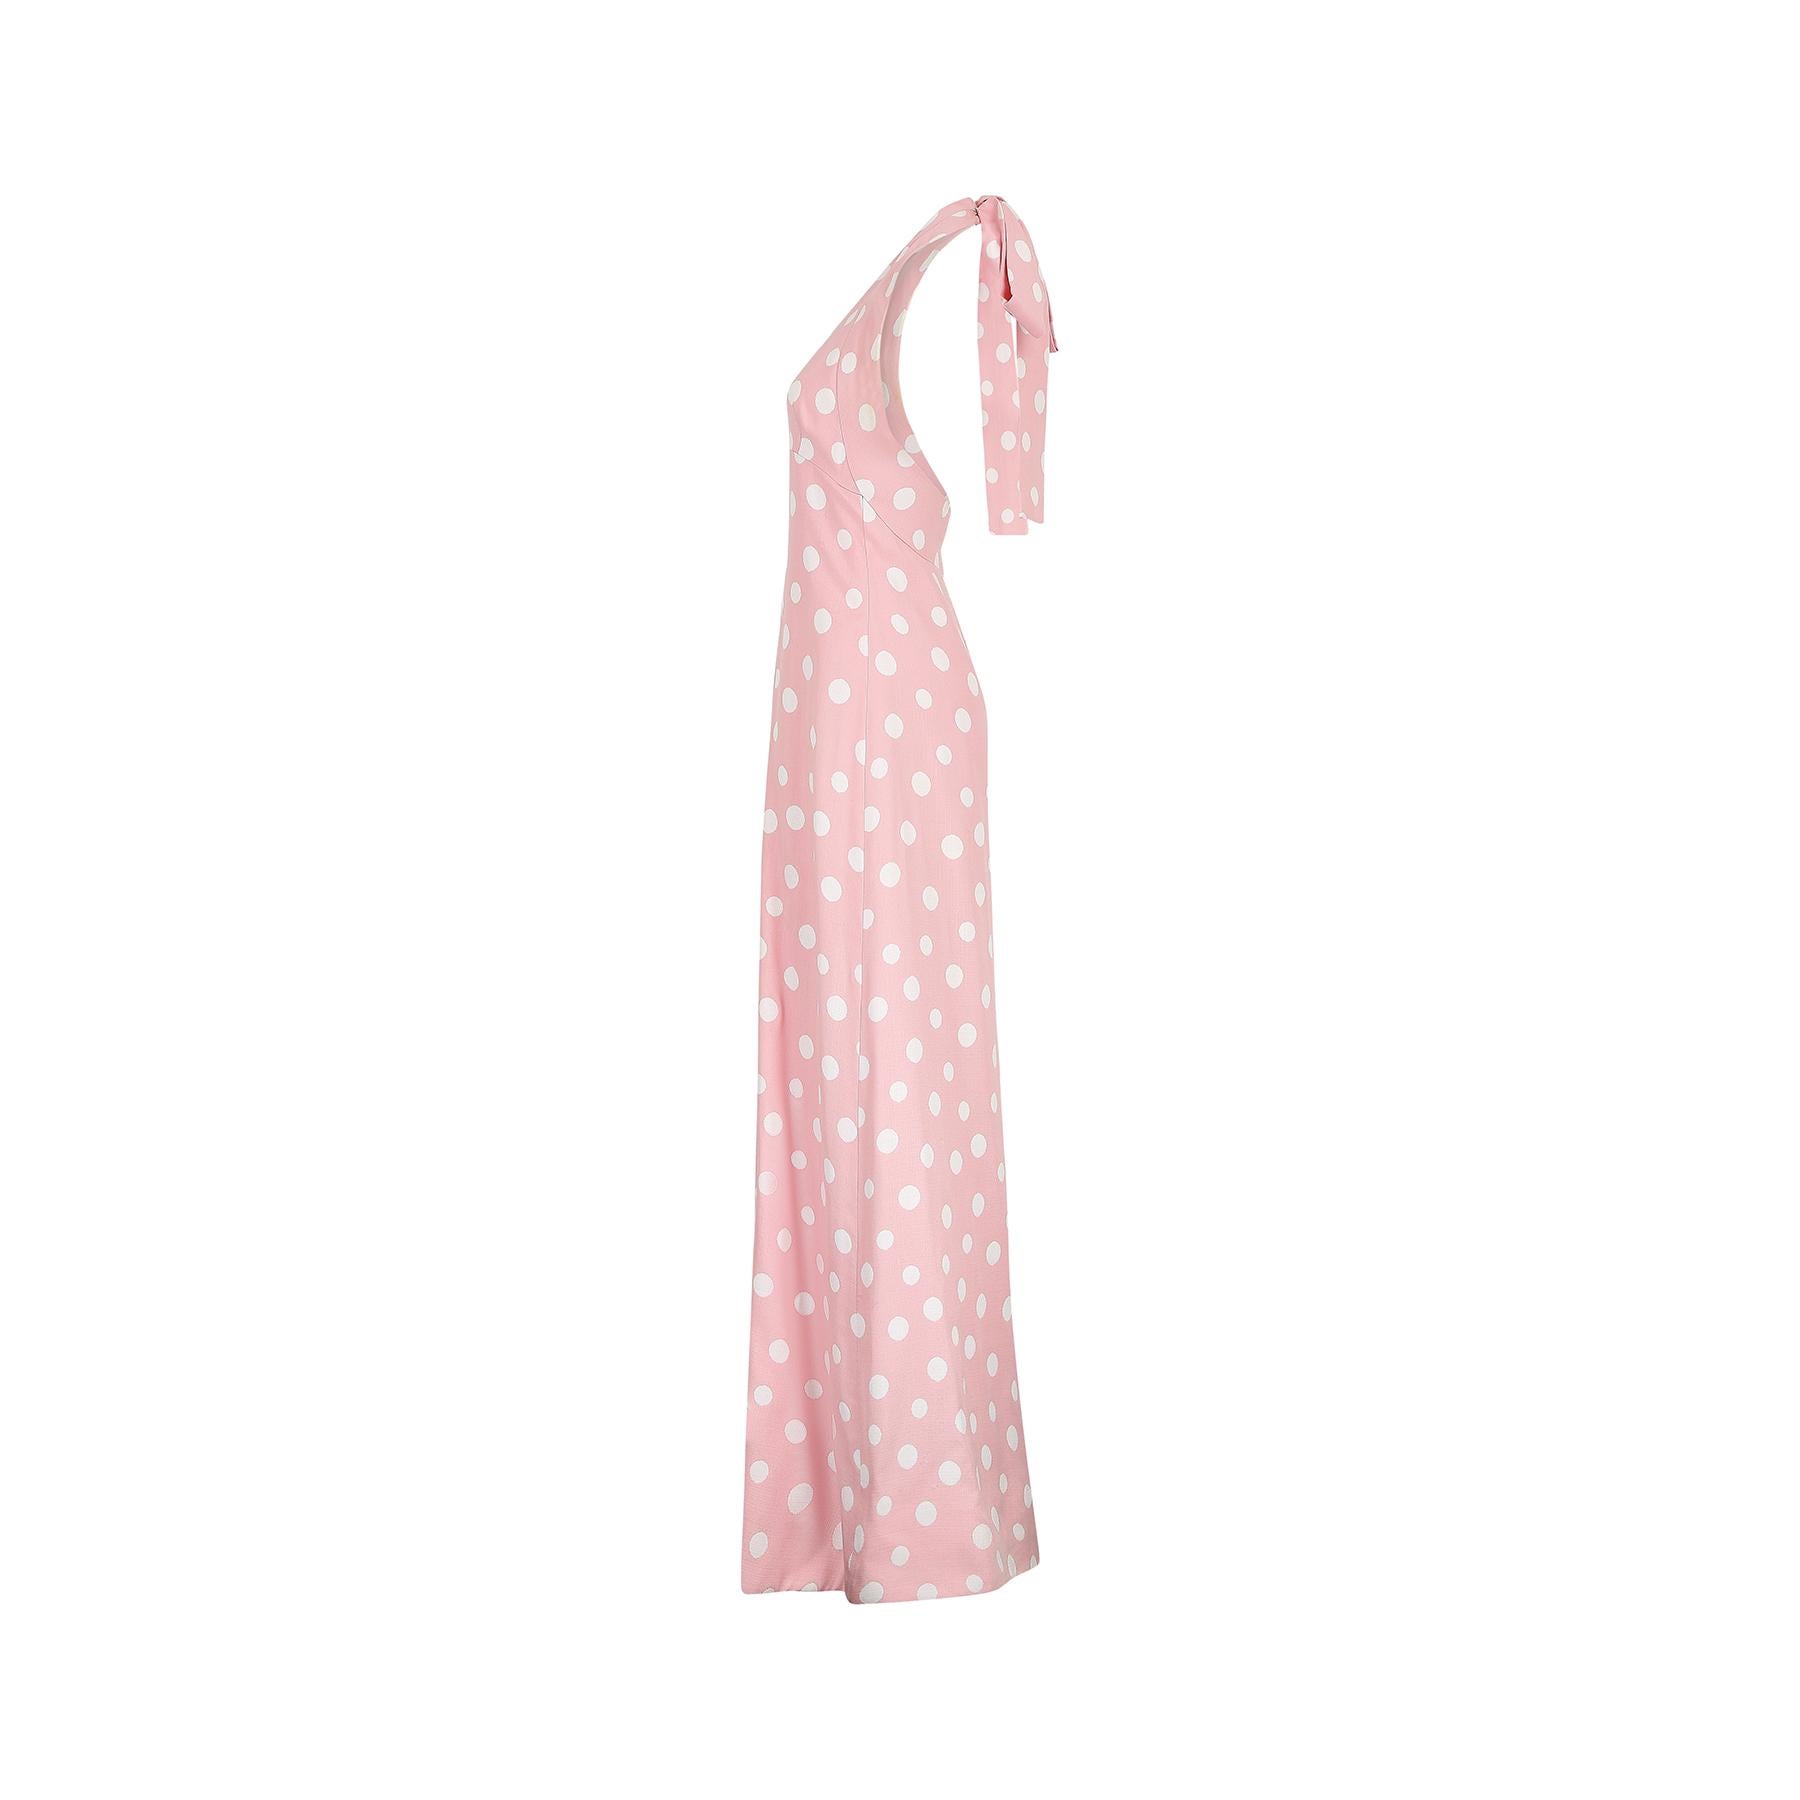 1970s Christian Dior pink and white polka dot maxi dress.  This is a rare example of a labelled Christian Dior Patron label which indicated that the dress was a bespoke order which could only be ordered by haute couture clients.  It's made in a